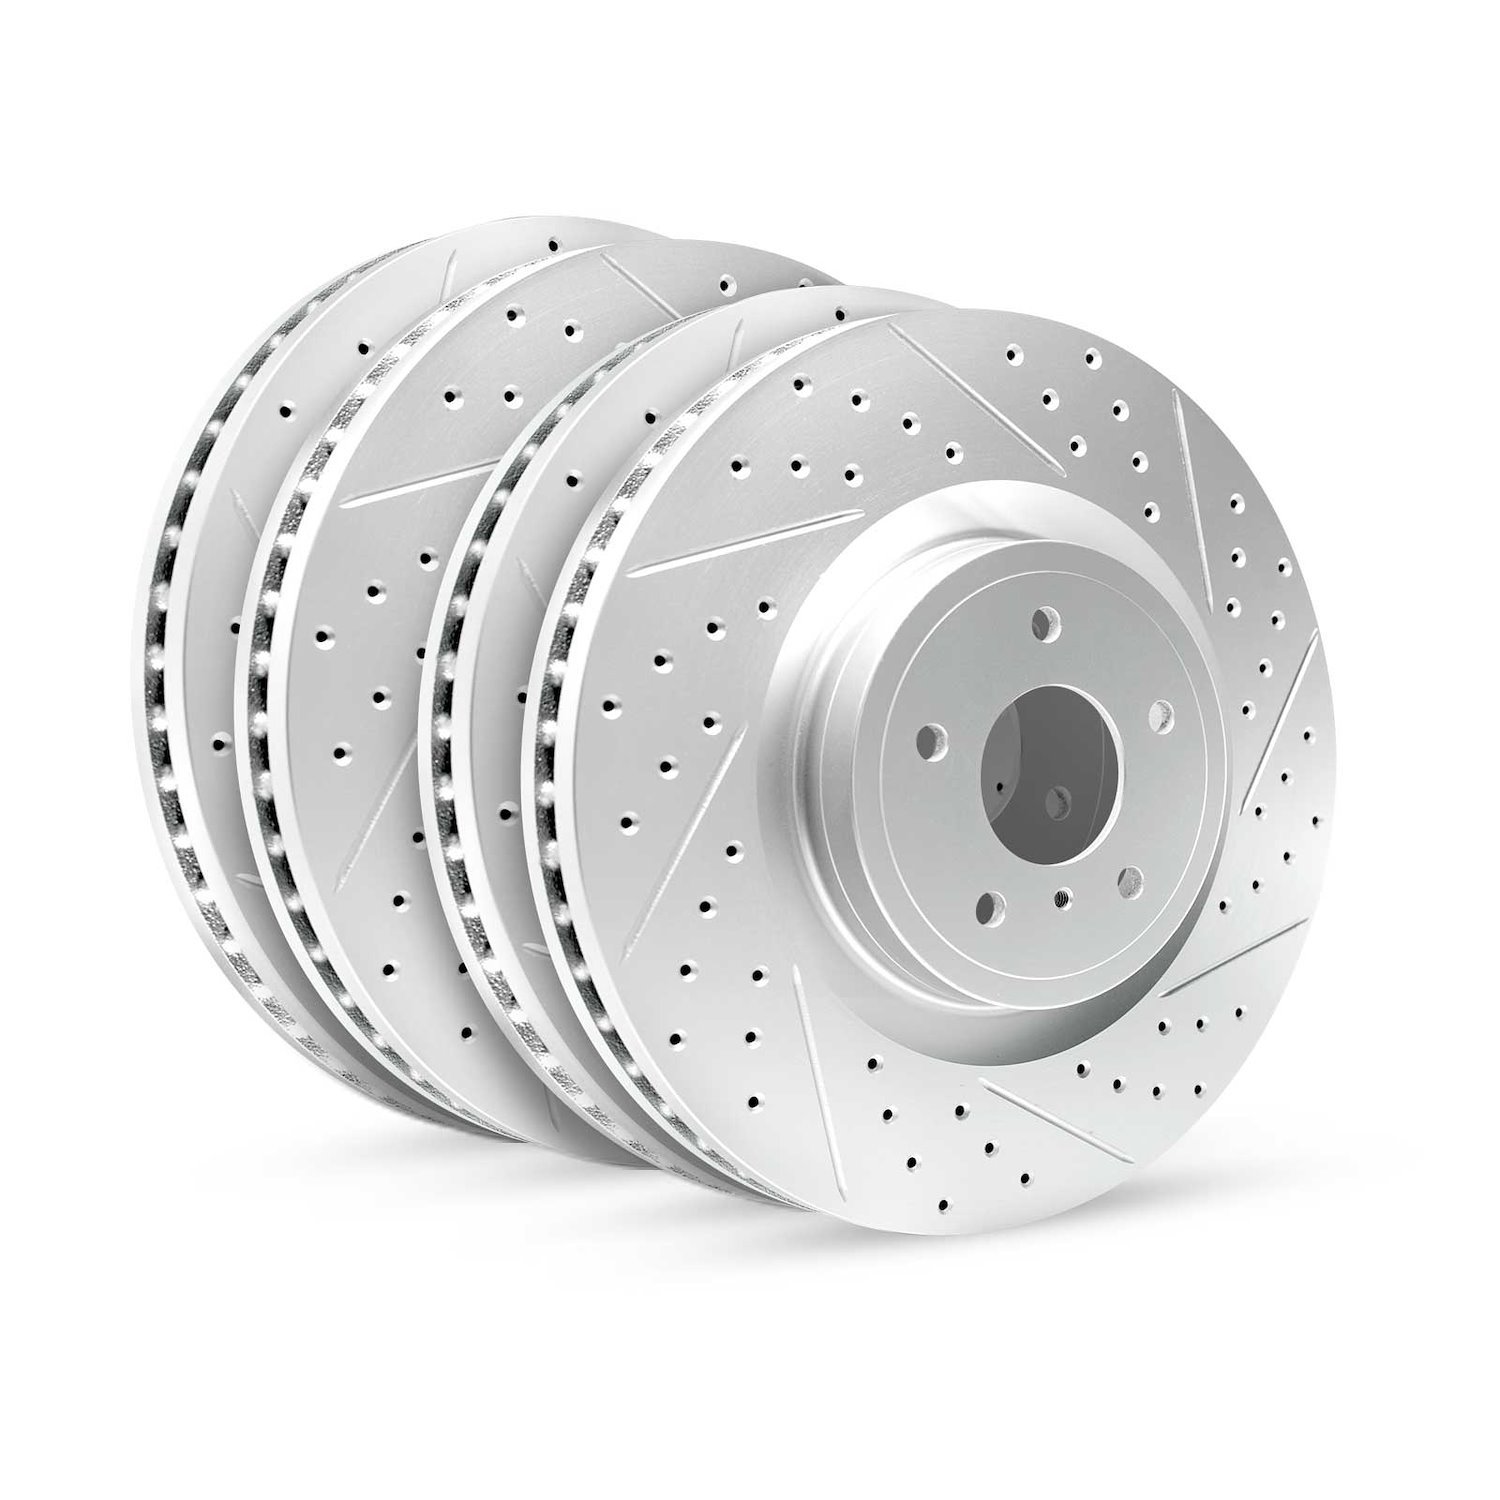 GEO-Carbon Drilled/Slotted Rotors, Fits Select